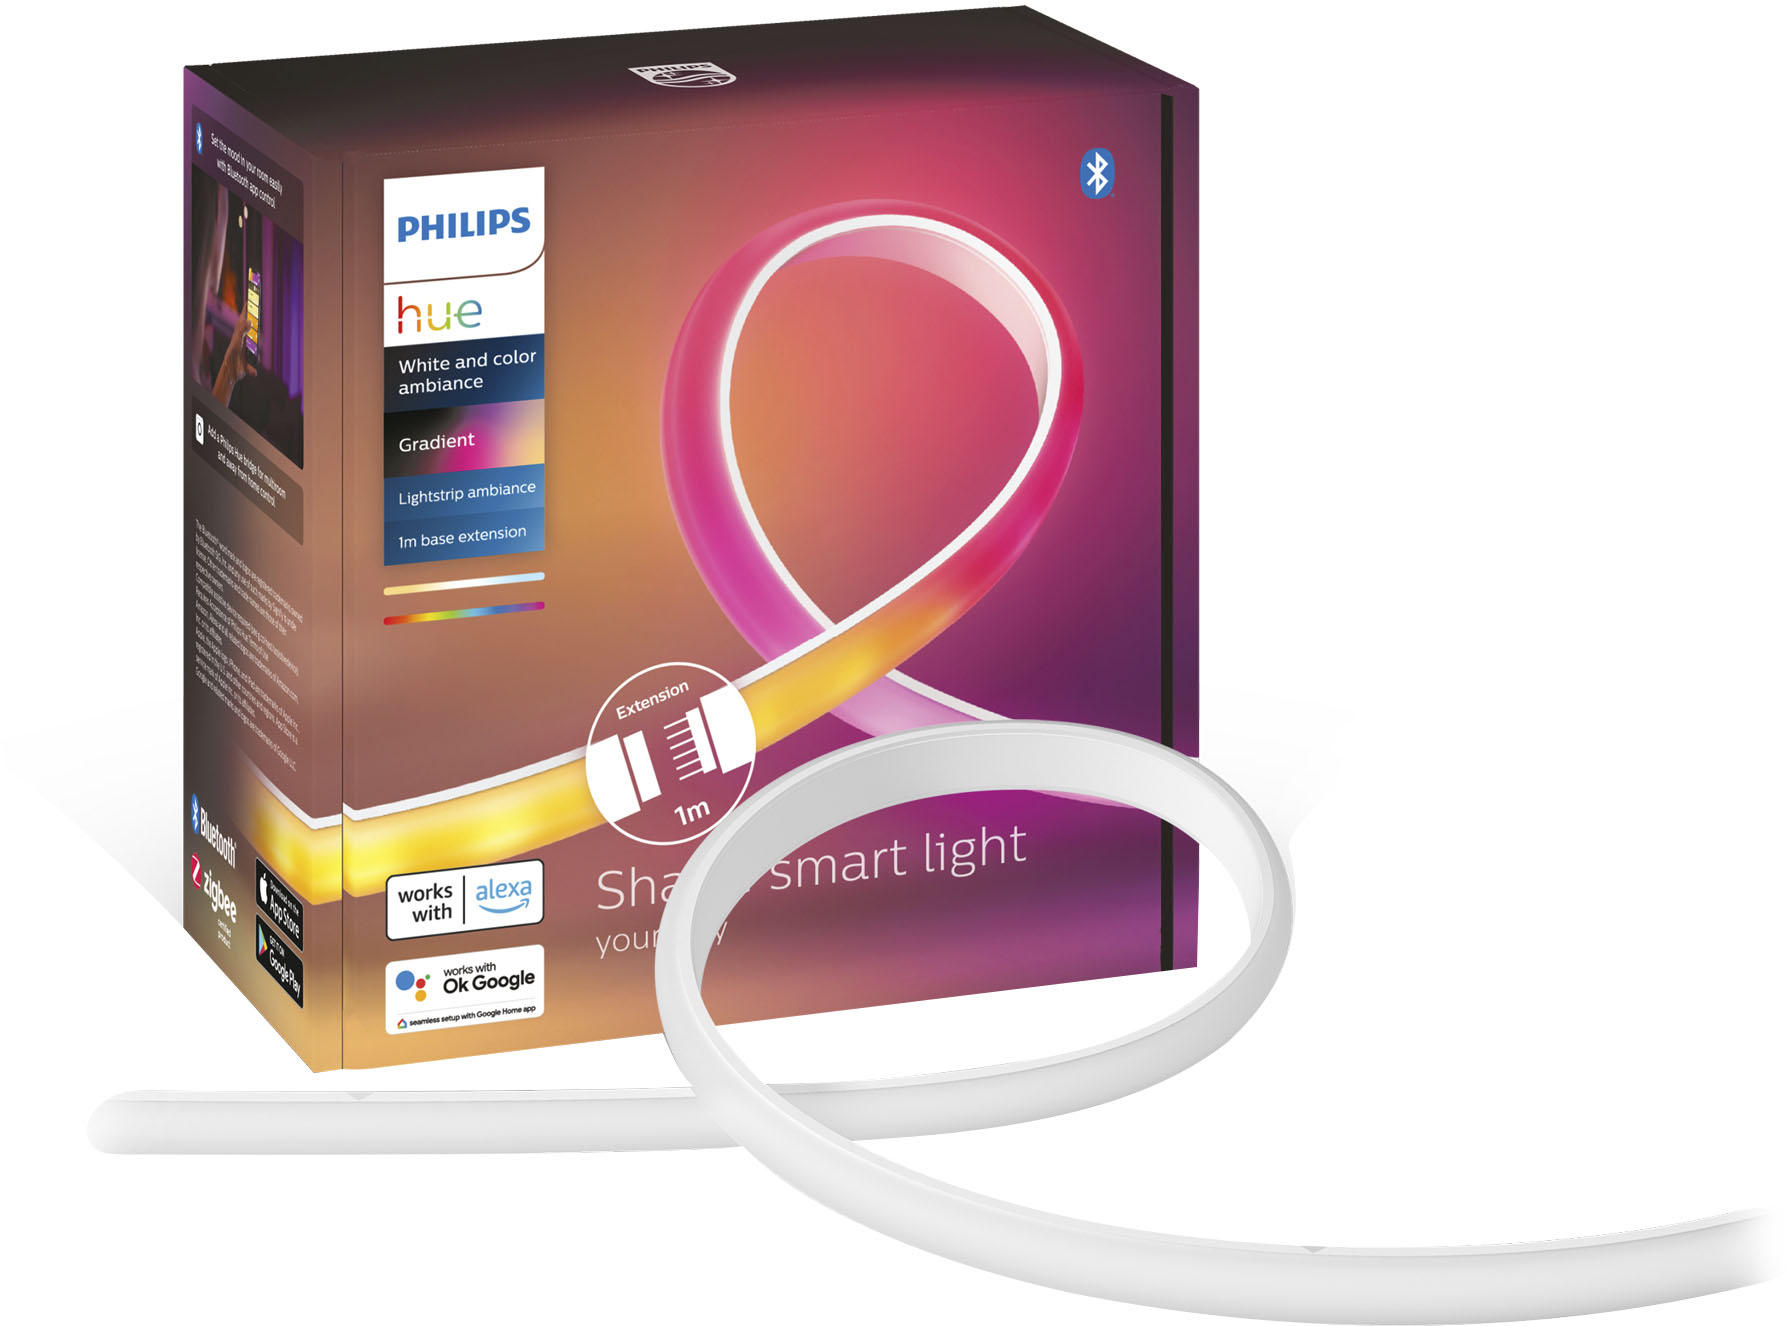 Philips 570564 Hue Ambiance Gradient Lightstrip Extension 40